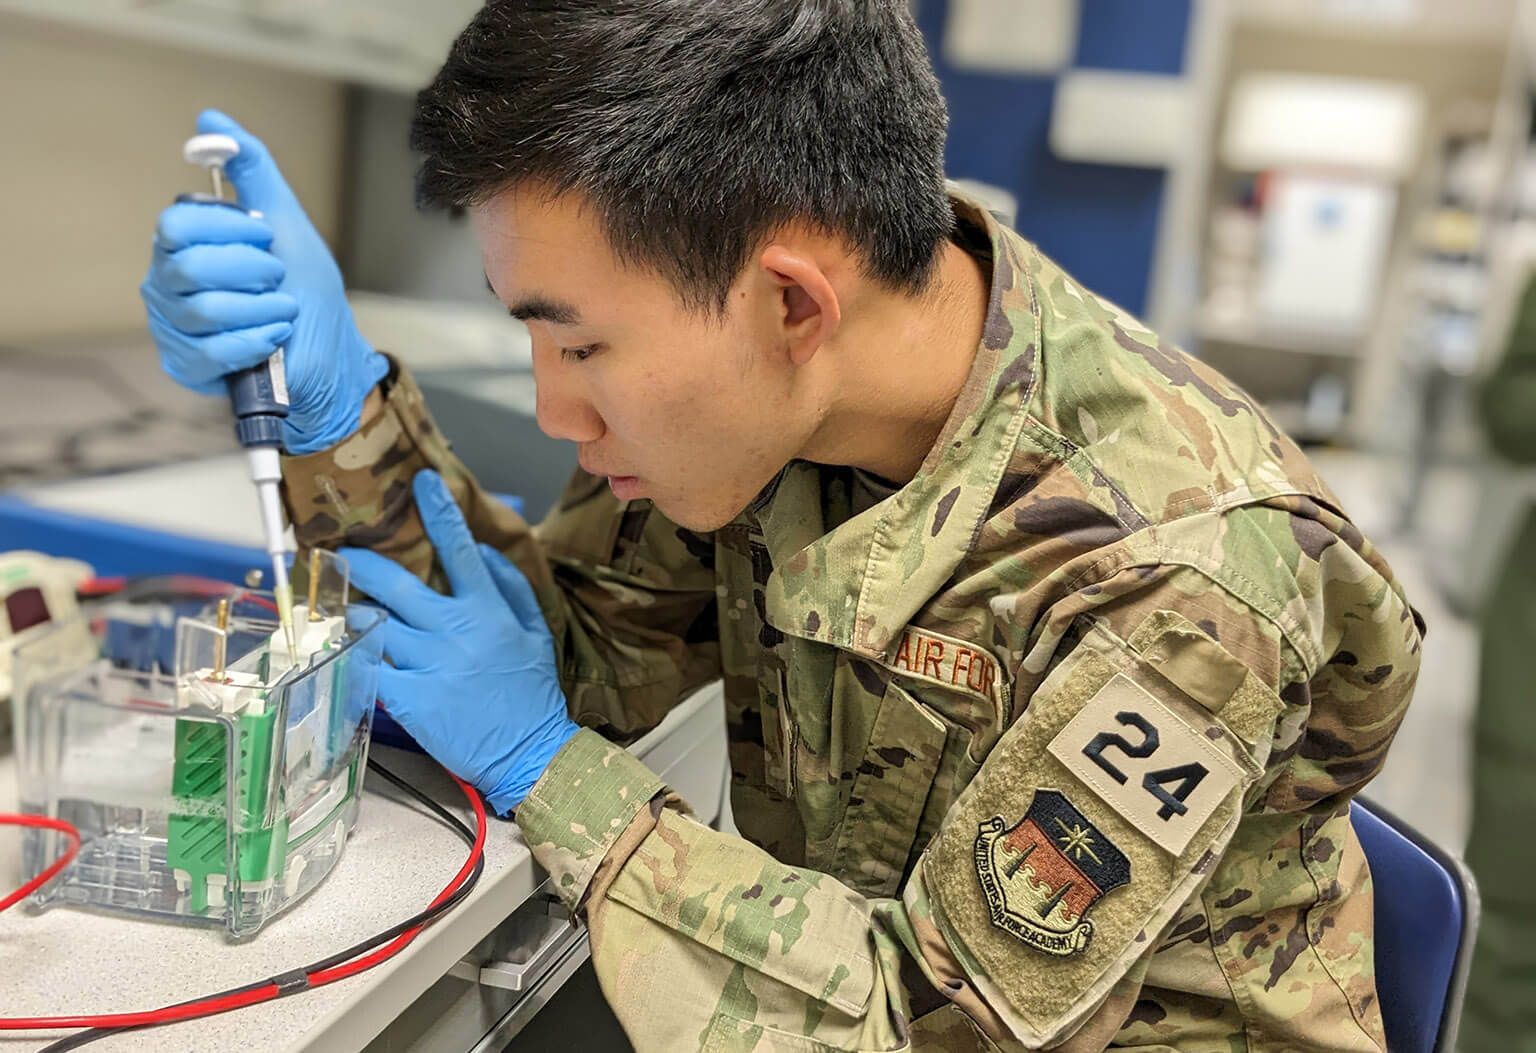 Cadet 1st Class Cosmo Cao conducts an experiment as part of his research.